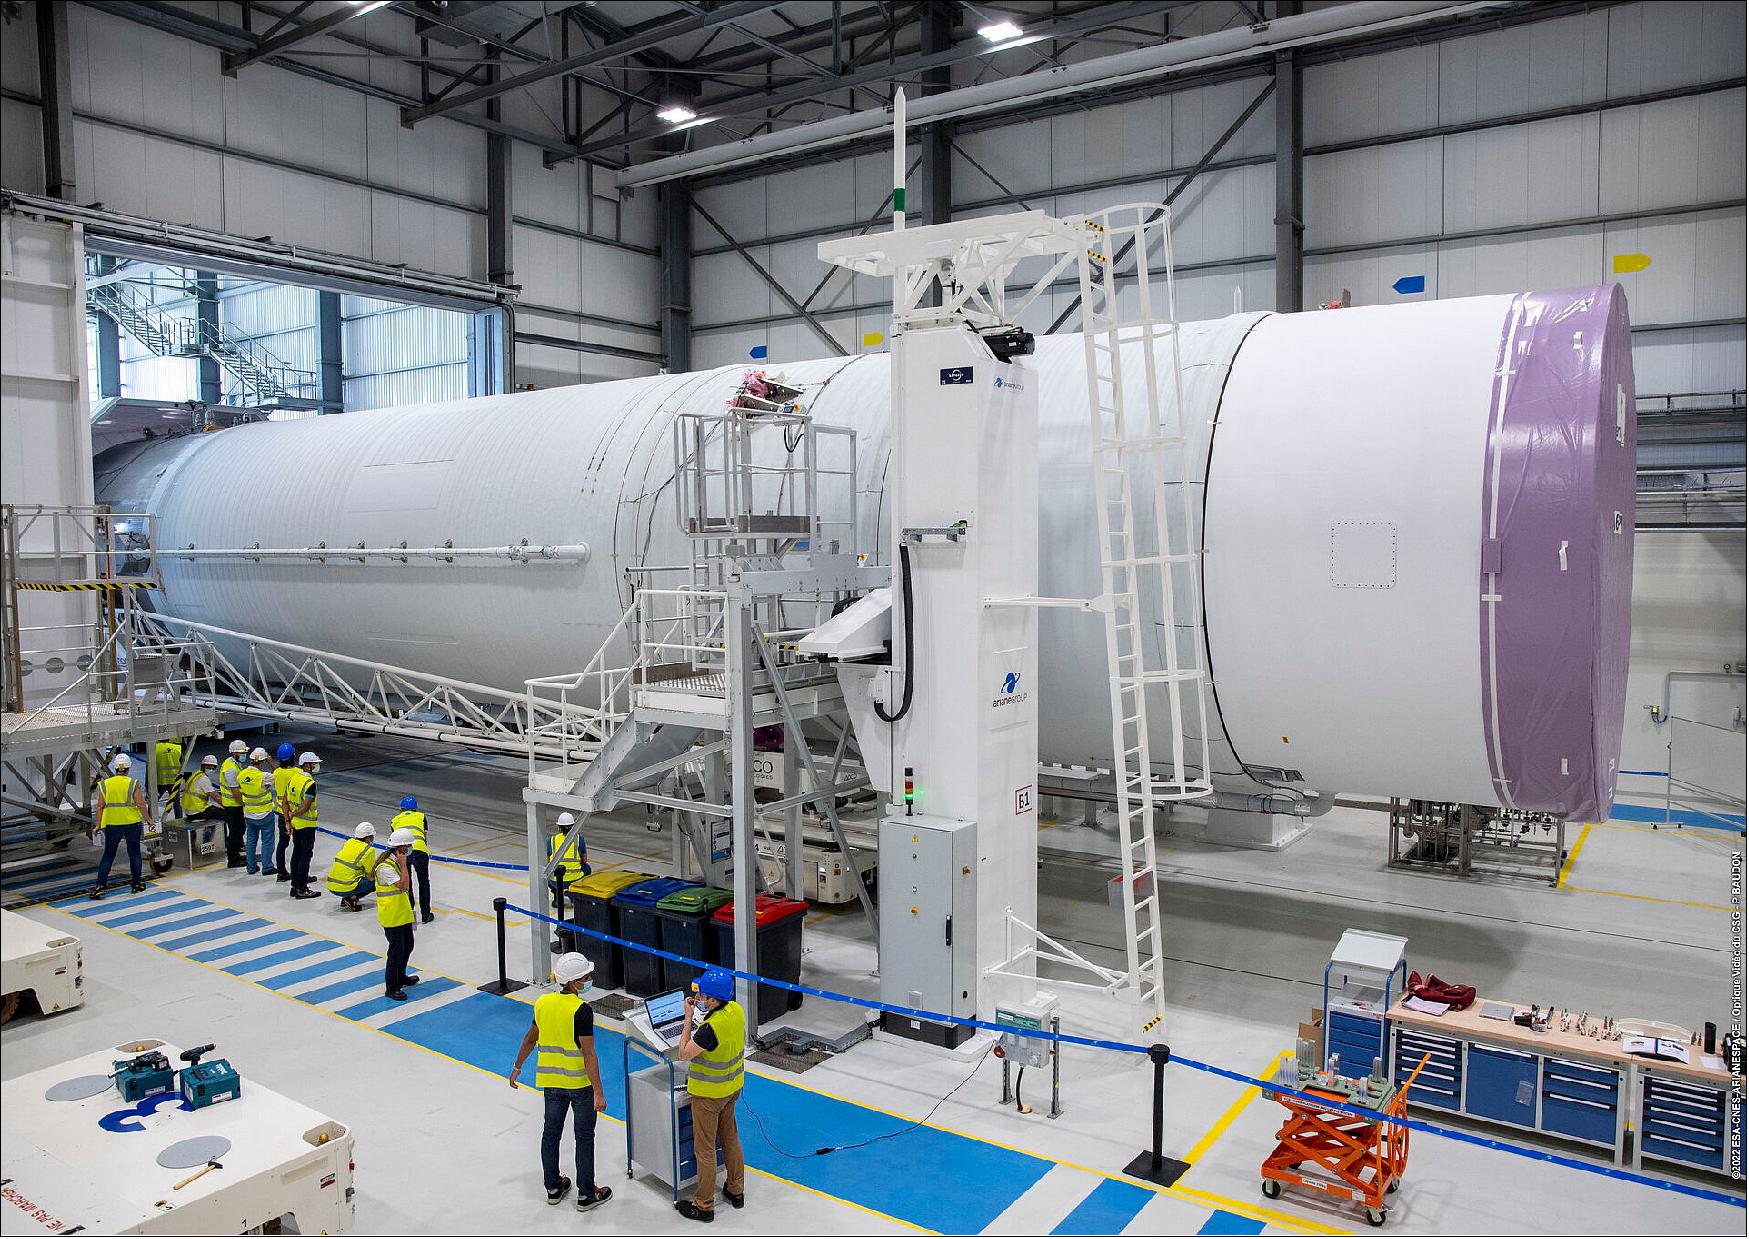 Figure 16: First Ariane 6 lower stage to enter the new assembly building at Europ's Spaceport in French Guiana (image credit: ESA/CNES/Aianespace)